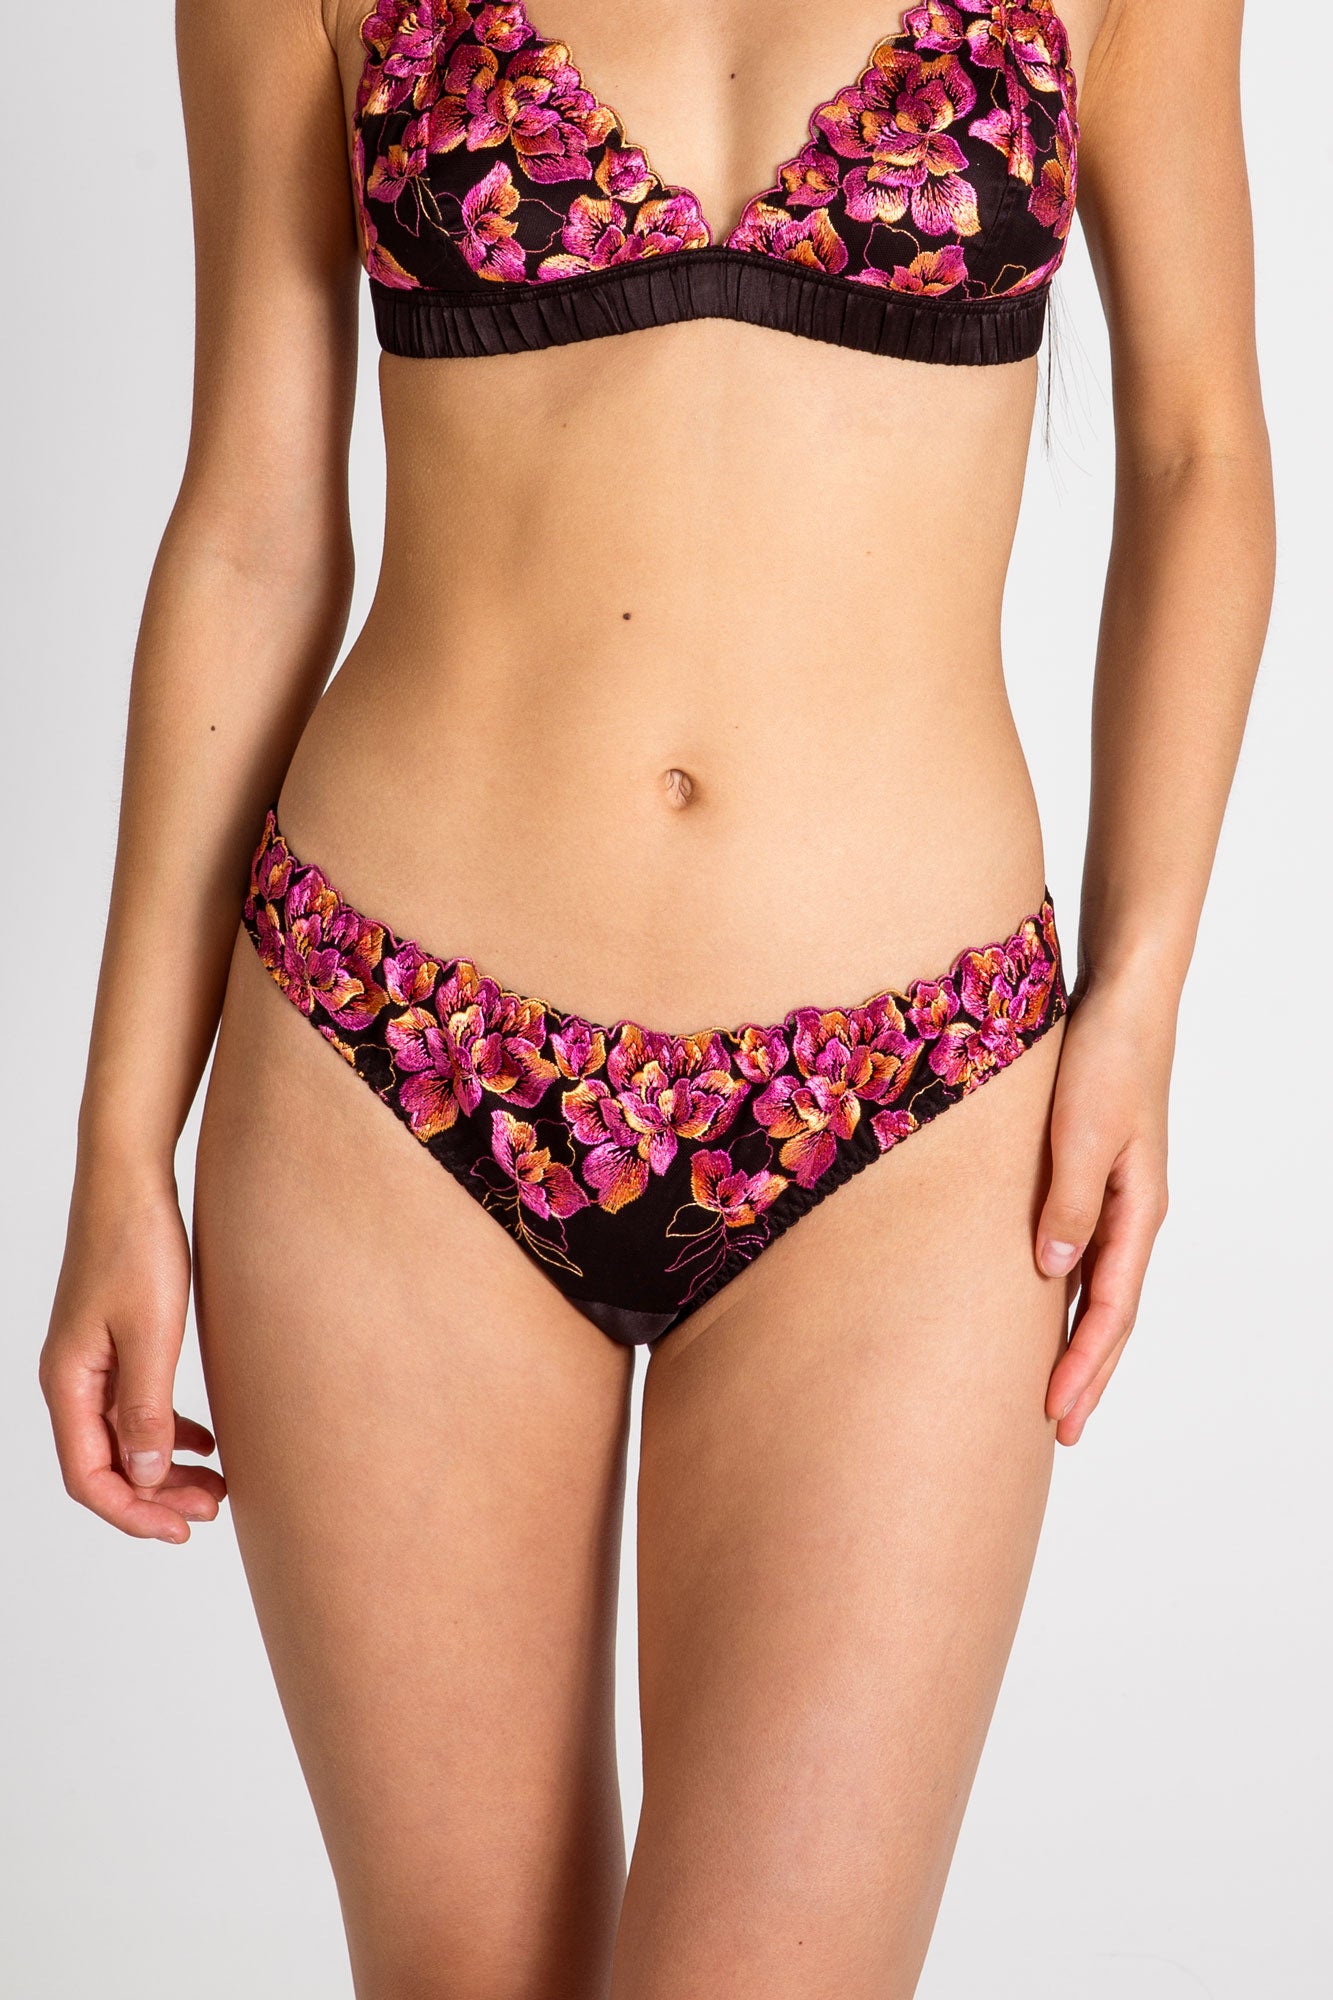 Gemma floral knickers  Luxury, real silk lingerie sets